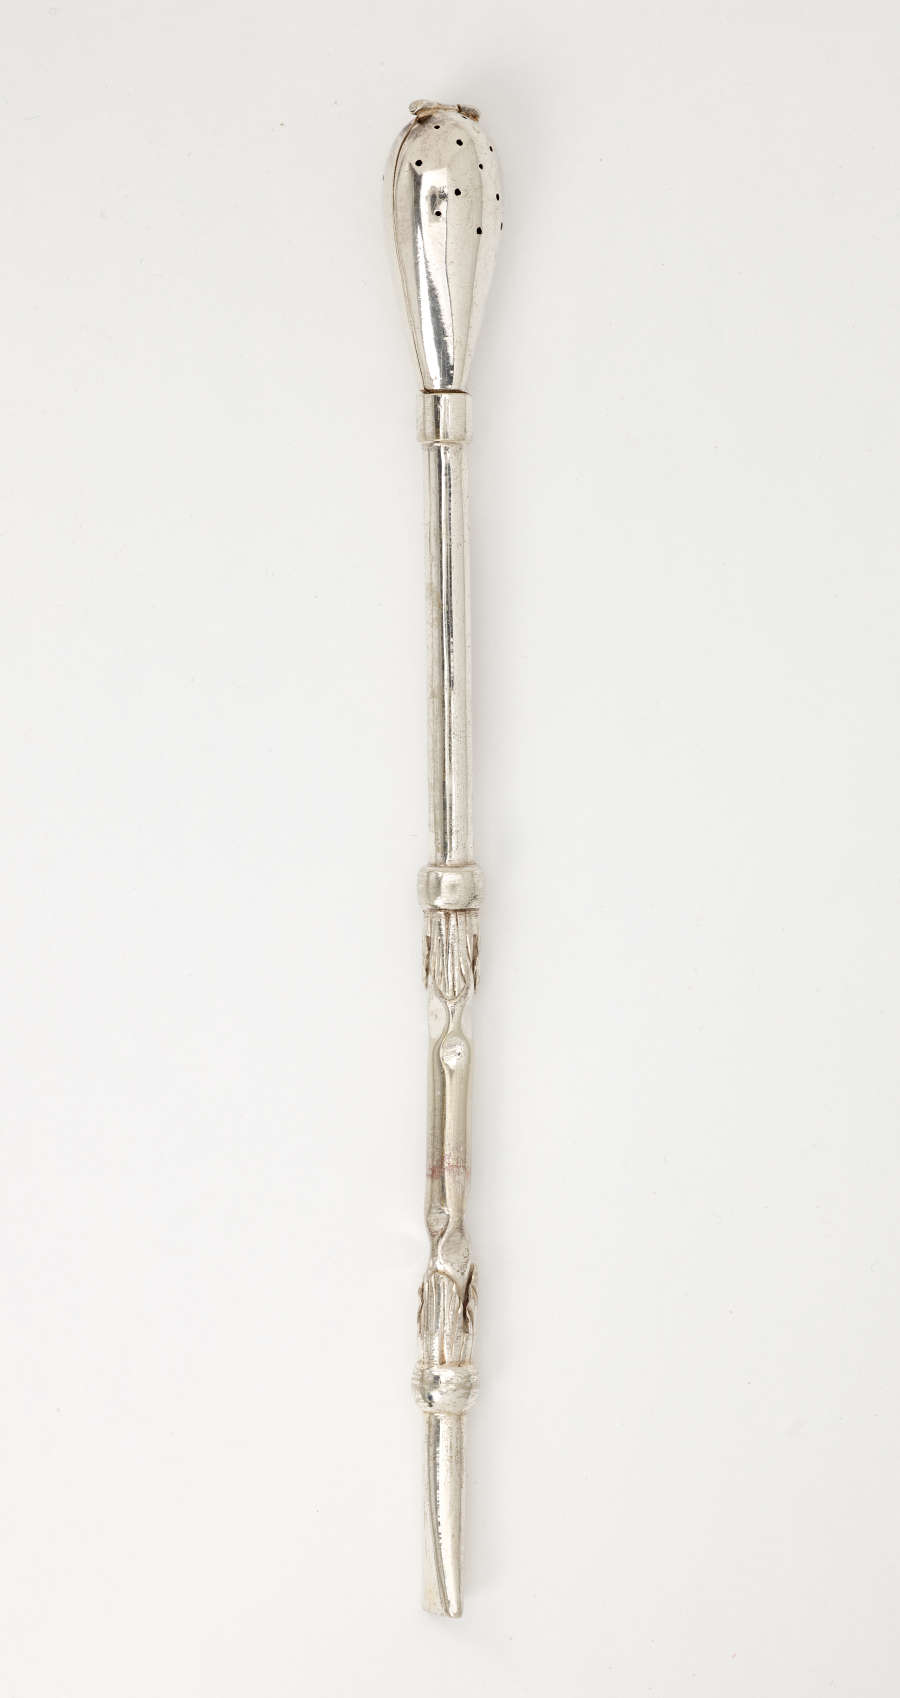 A silver utensil with a long skinny handle and bulbous end with small holes.